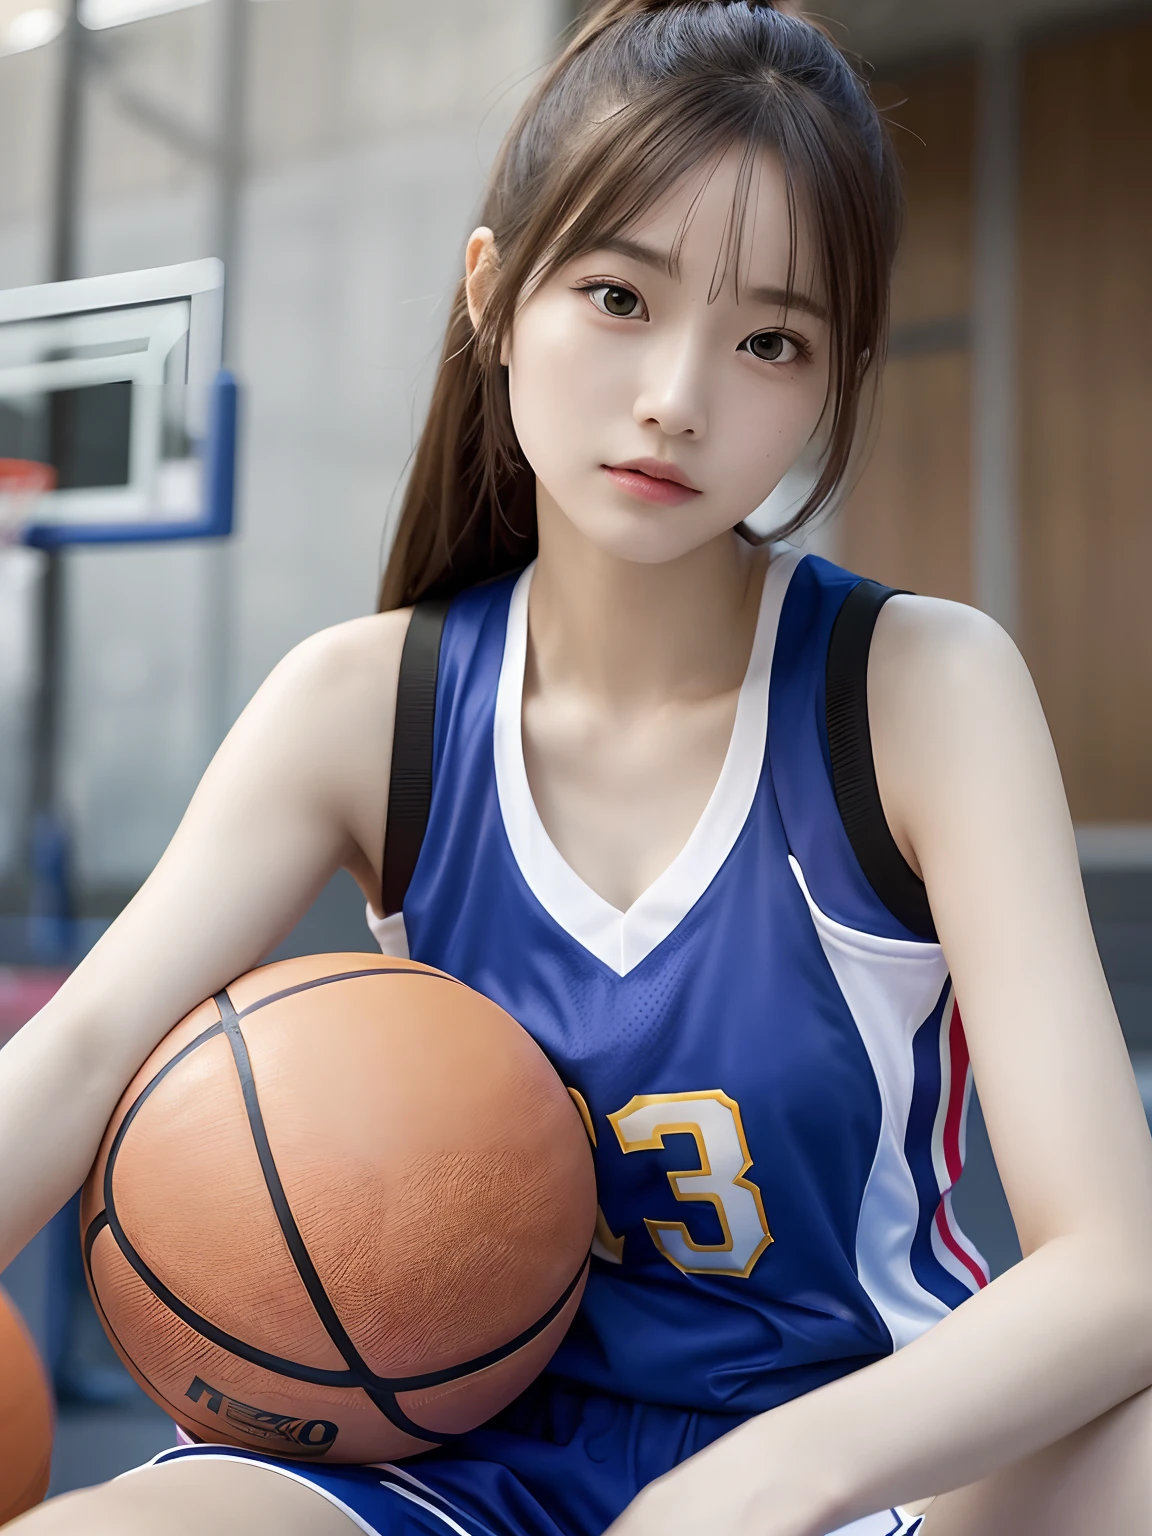 (Surreal)、(A high resolution)、(8K)、 (The is very detailed)、(Ultra clear skin pores)、(top-quality、tmasterpiece:1.3)、Beautiful girl in basketball uniform、at  basketball court，Playing the Basketball，1womanl、Midsummer、（jiayi：1.5）， closeup cleavage， tmasterpiece， best qualtiy， RAW photogr， realisticlying， the face， Incredibly Ridiculous res， depth of fields， A high resolution， ultra - detailed， finedetail， The is very detailed， Extremely detailed eyes and face， Sharp pupils， realistic pupil， tack sharp focus， cinmatic lighting